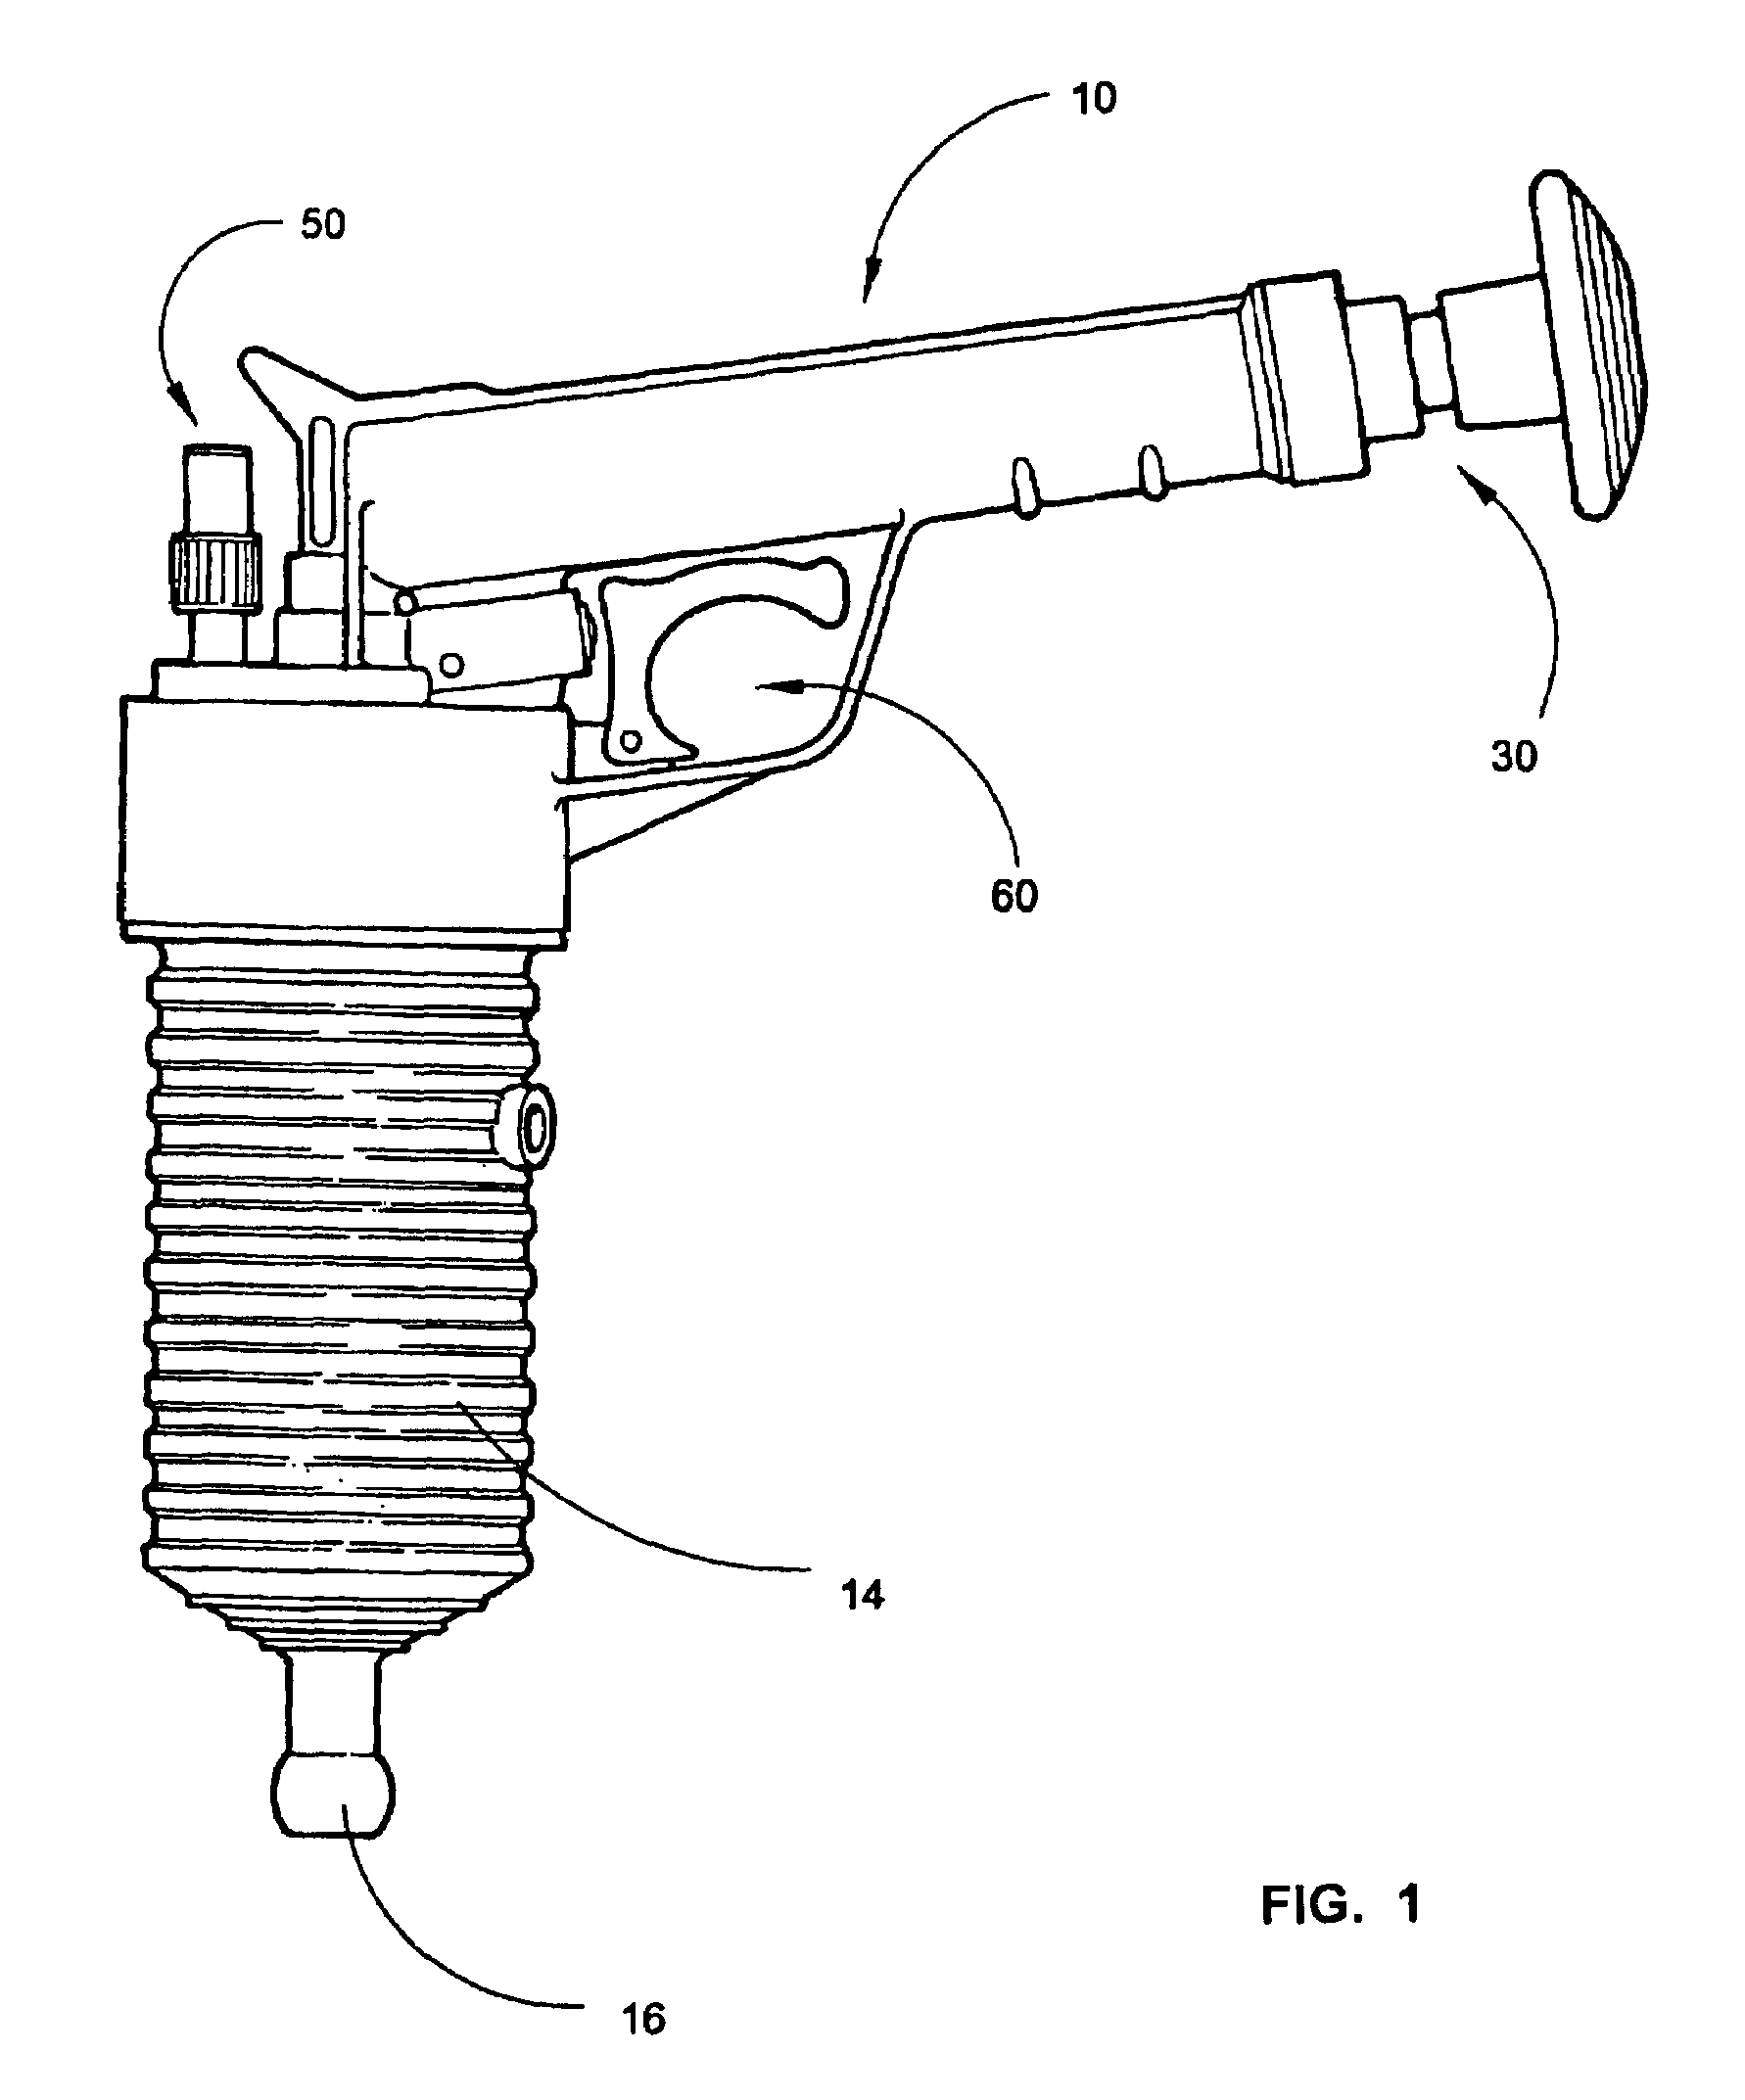 Self-contained handheld drain clearing compressed air device